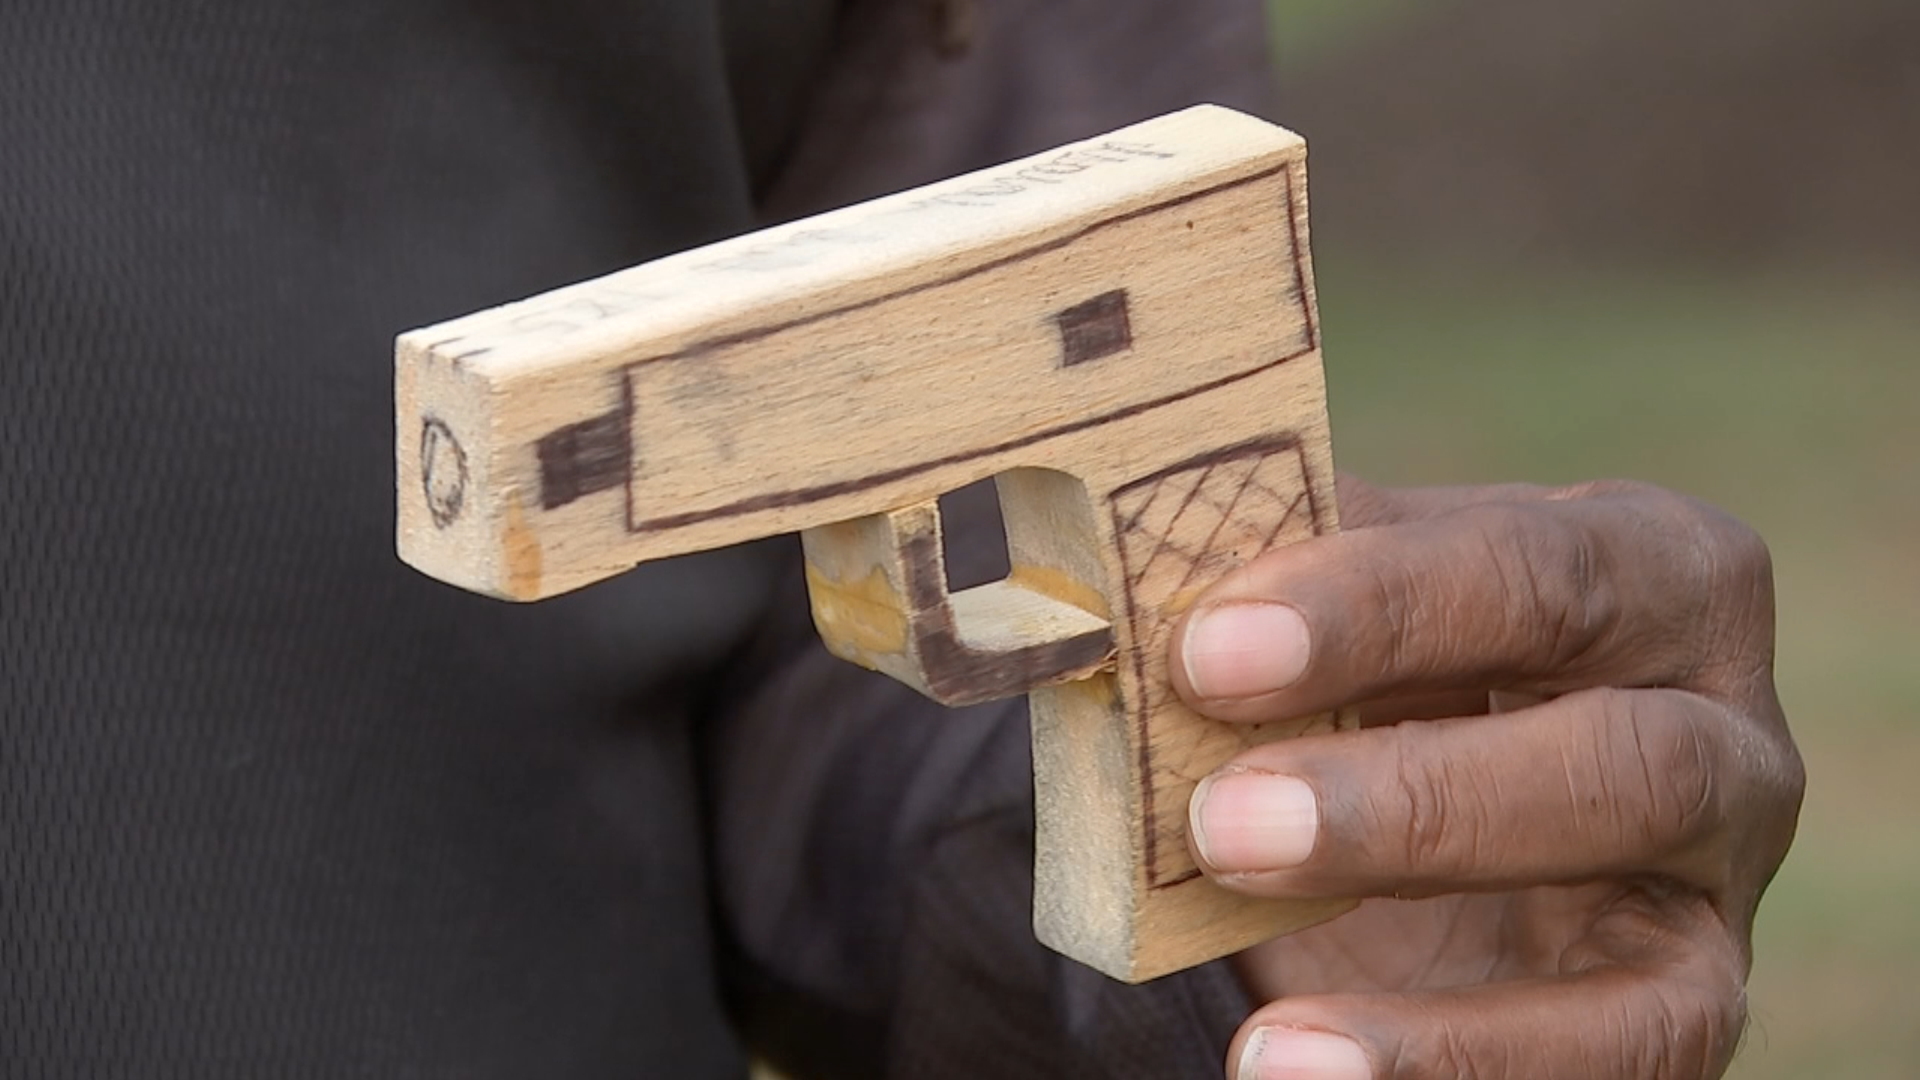 ‘Hold Him Accountable’: Parents Outraged After Teacher Let Student Make Wooden Gun Toy In Shop Class